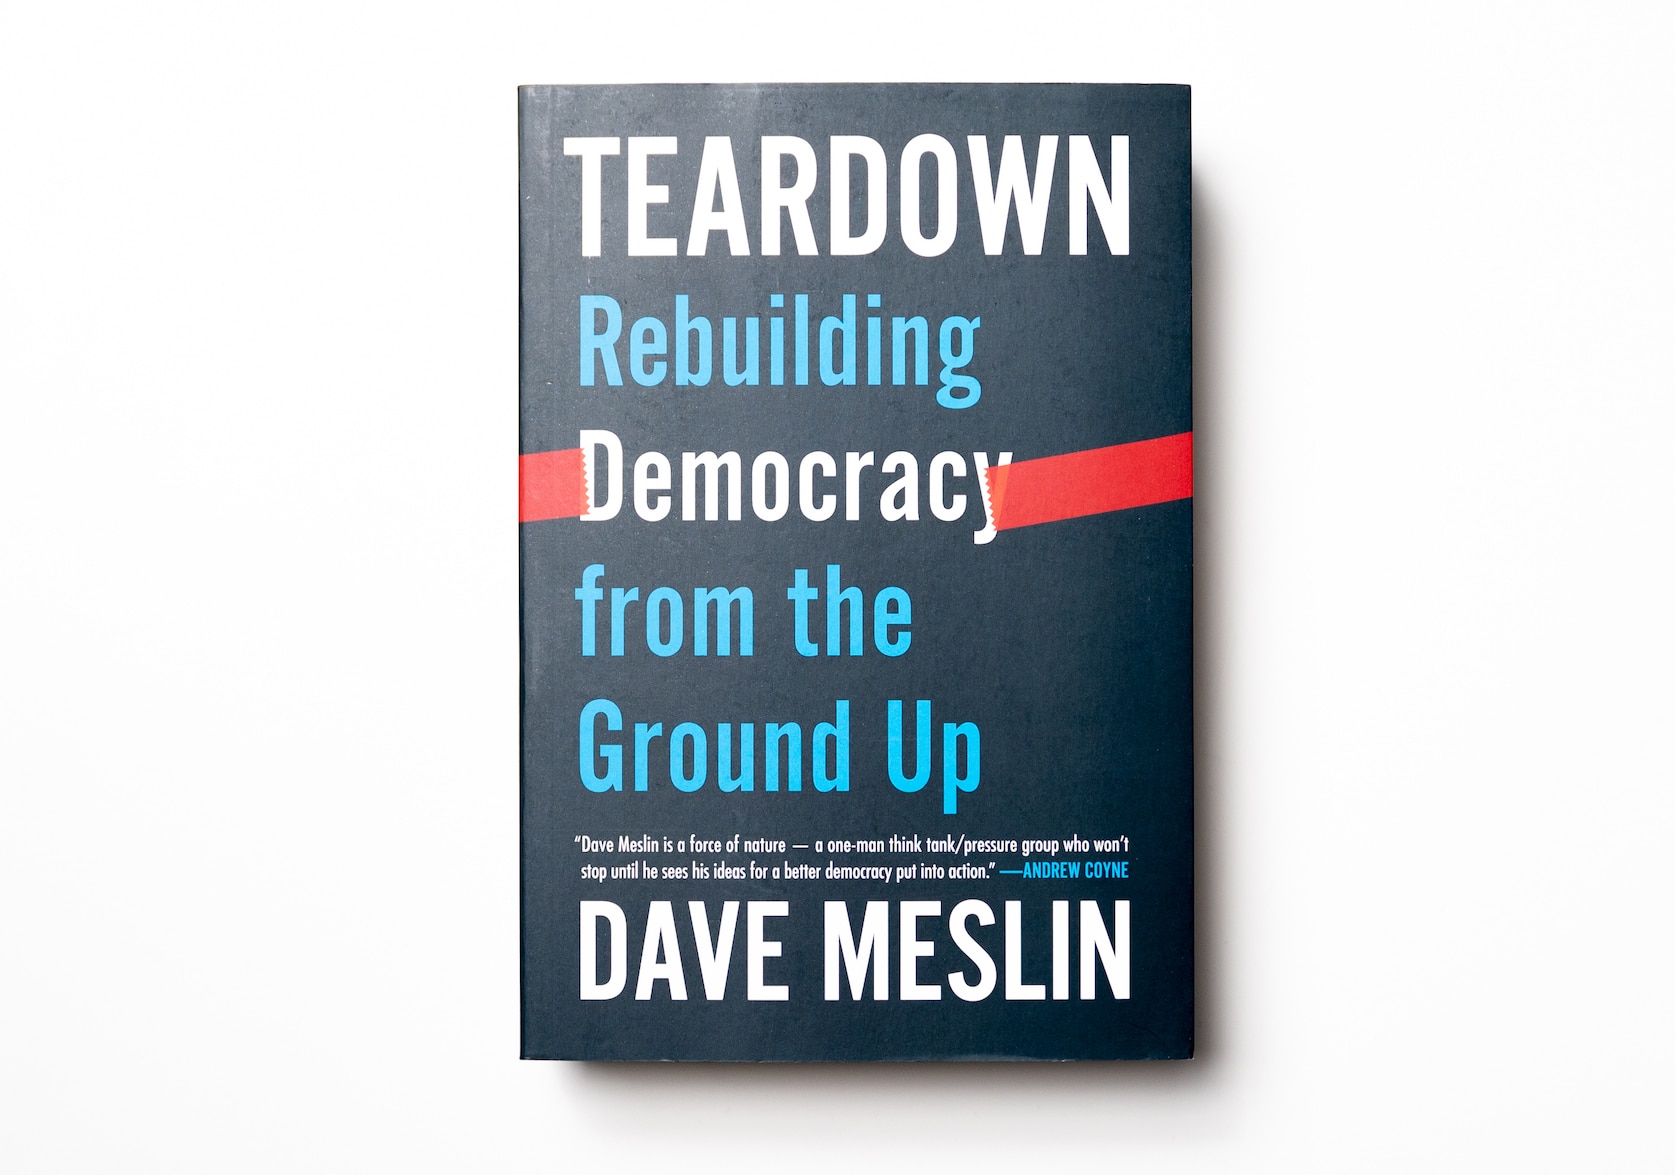 Teardown: Rebuilding Democracy from the Ground Up by Dave Meslin